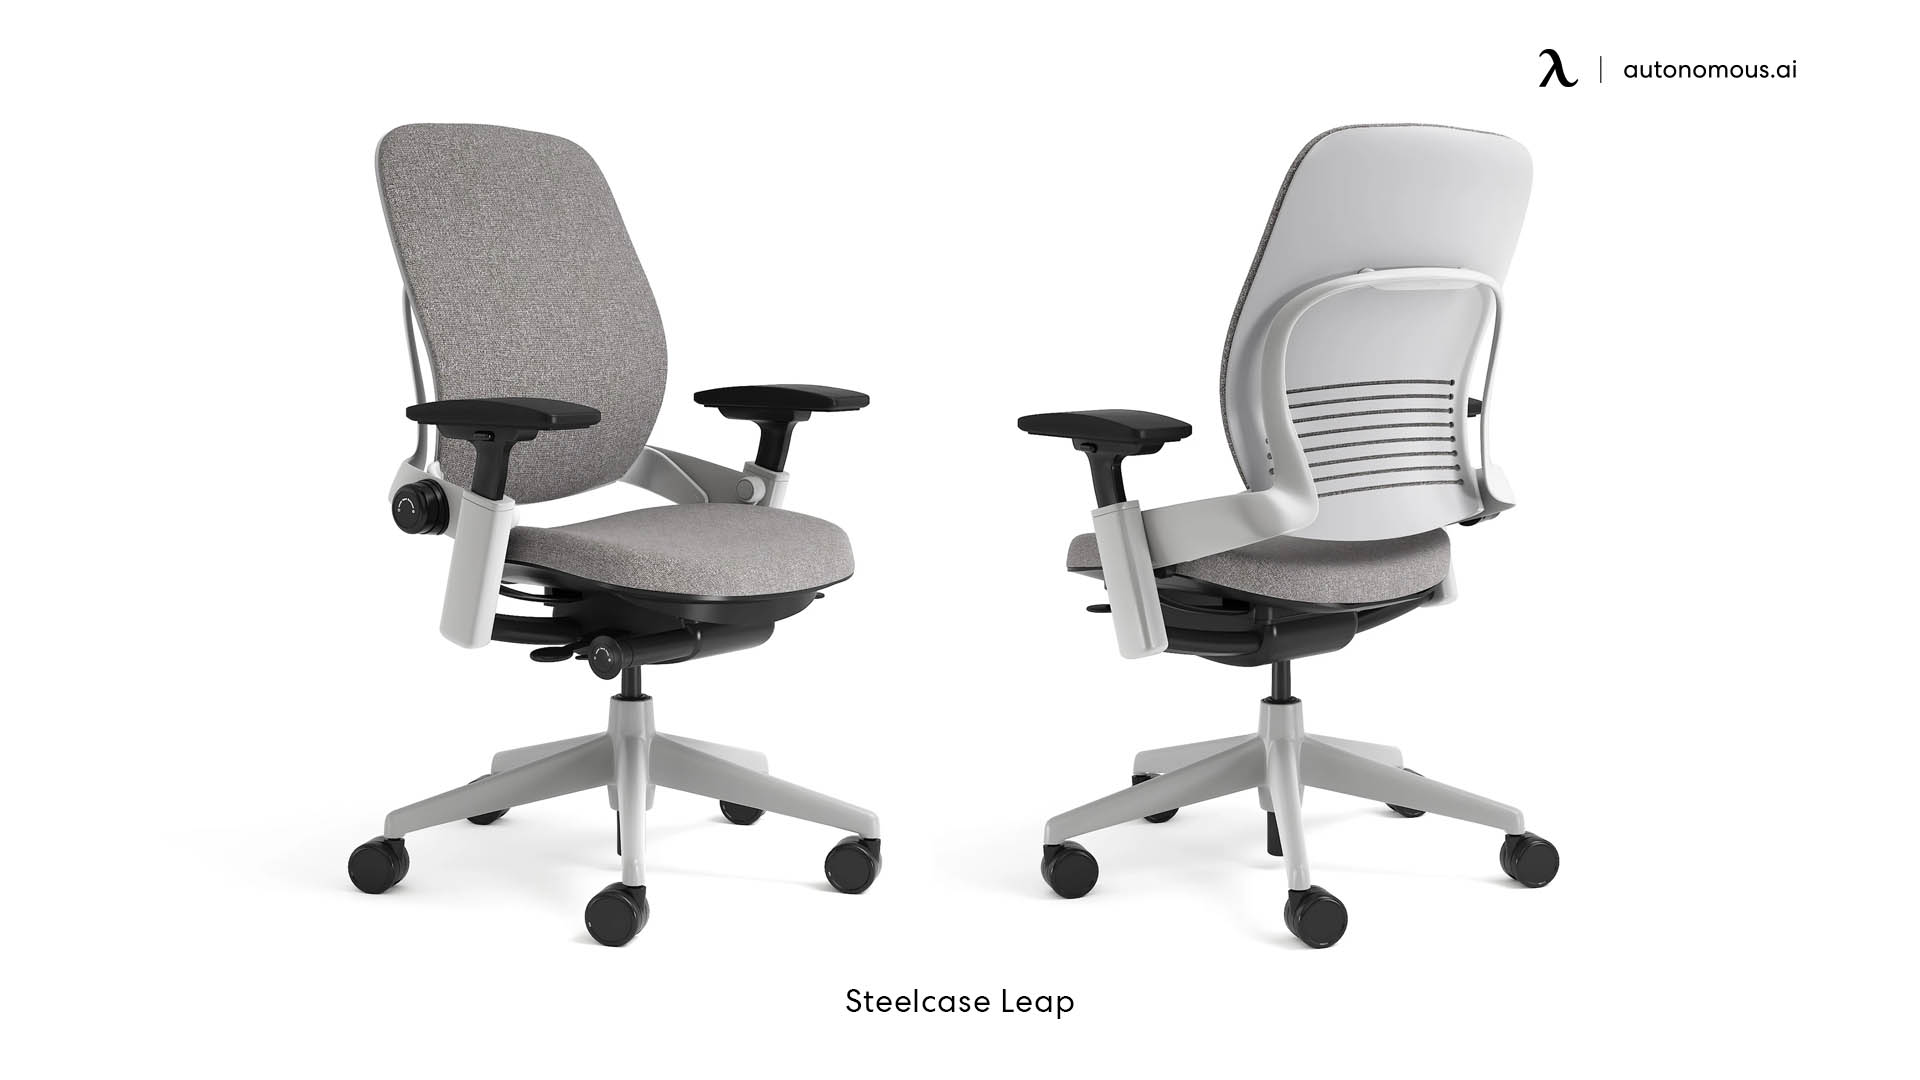 Leap Plus chair from SteelCase